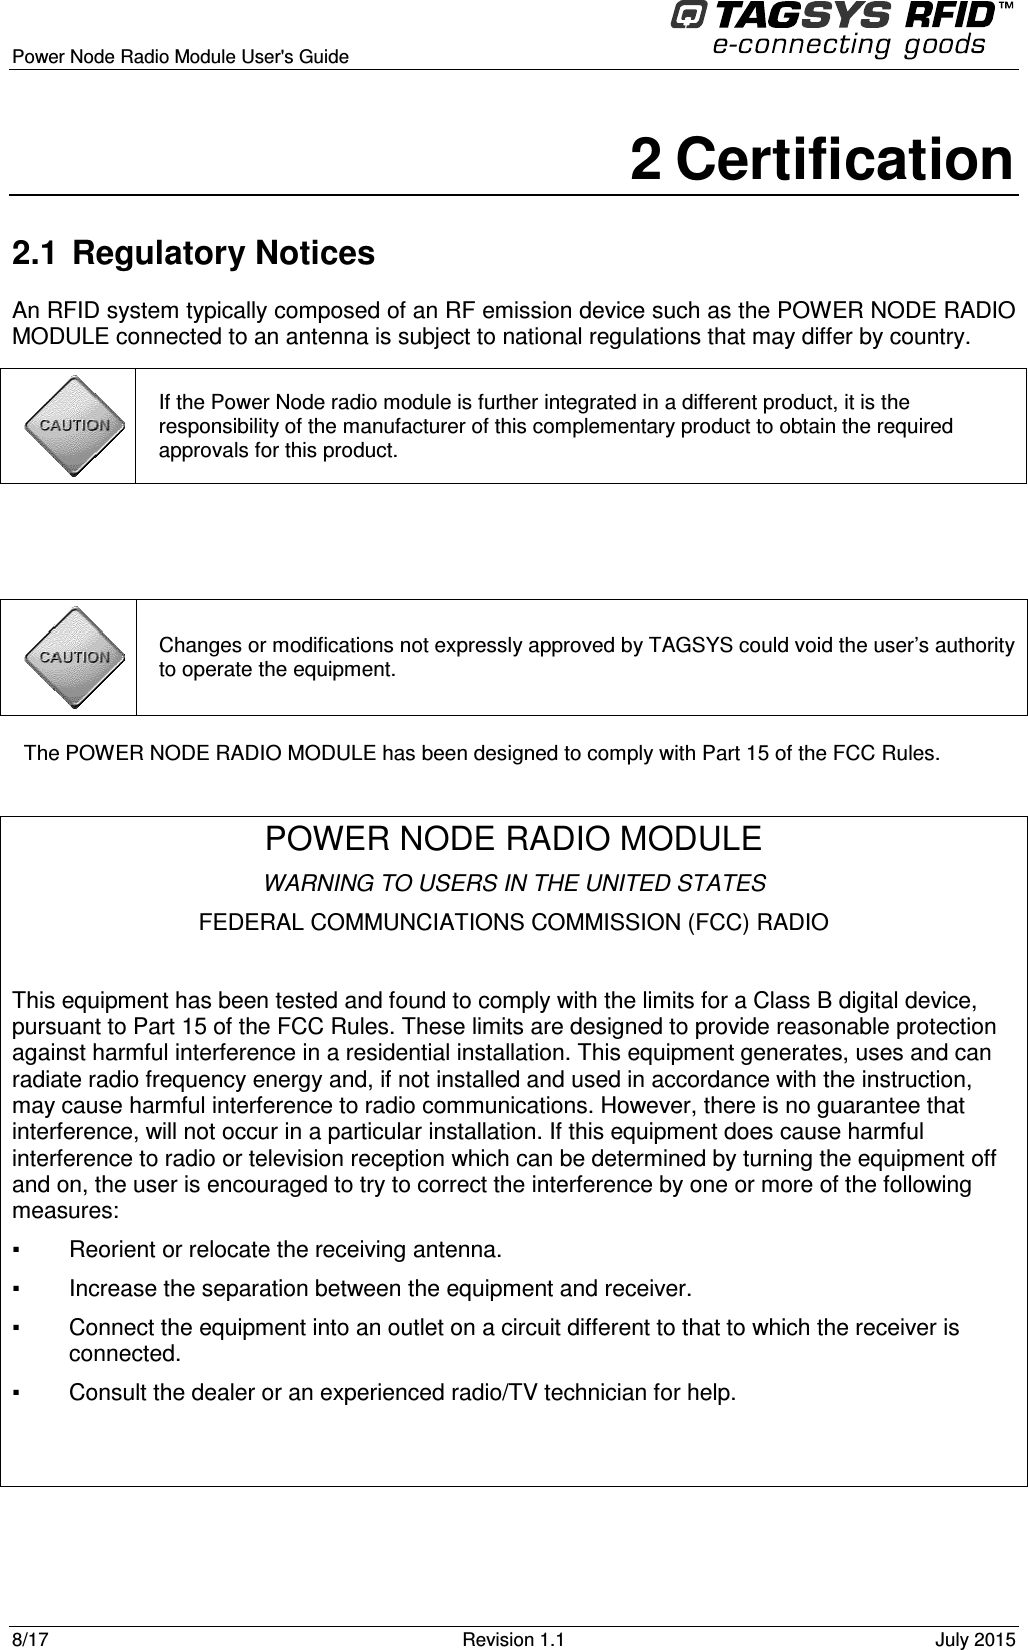  Power Node Radio Module User&apos;s Guide     8/17  Revision 1.1  July 2015  2 Certification 2.1  Regulatory Notices An RFID system typically composed of an RF emission device such as the POWER NODE RADIO MODULE connected to an antenna is subject to national regulations that may differ by country.   The POWER NODE RADIO MODULE has been designed to comply with Part 15 of the FCC Rules.  POWER NODE RADIO MODULE WARNING TO USERS IN THE UNITED STATES FEDERAL COMMUNCIATIONS COMMISSION (FCC) RADIO  This equipment has been tested and found to comply with the limits for a Class B digital device, pursuant to Part 15 of the FCC Rules. These limits are designed to provide reasonable protection against harmful interference in a residential installation. This equipment generates, uses and can radiate radio frequency energy and, if not installed and used in accordance with the instruction, may cause harmful interference to radio communications. However, there is no guarantee that interference, will not occur in a particular installation. If this equipment does cause harmful interference to radio or television reception which can be determined by turning the equipment off and on, the user is encouraged to try to correct the interference by one or more of the following measures:     Reorient or relocate the receiving antenna.    Increase the separation between the equipment and receiver.    Connect the equipment into an outlet on a circuit different to that to which the receiver is connected.    Consult the dealer or an experienced radio/TV technician for help.    Changes or modifications not expressly approved by TAGSYS could void the user’s authority to operate the equipment.  If the Power Node radio module is further integrated in a different product, it is the responsibility of the manufacturer of this complementary product to obtain the required approvals for this product. 